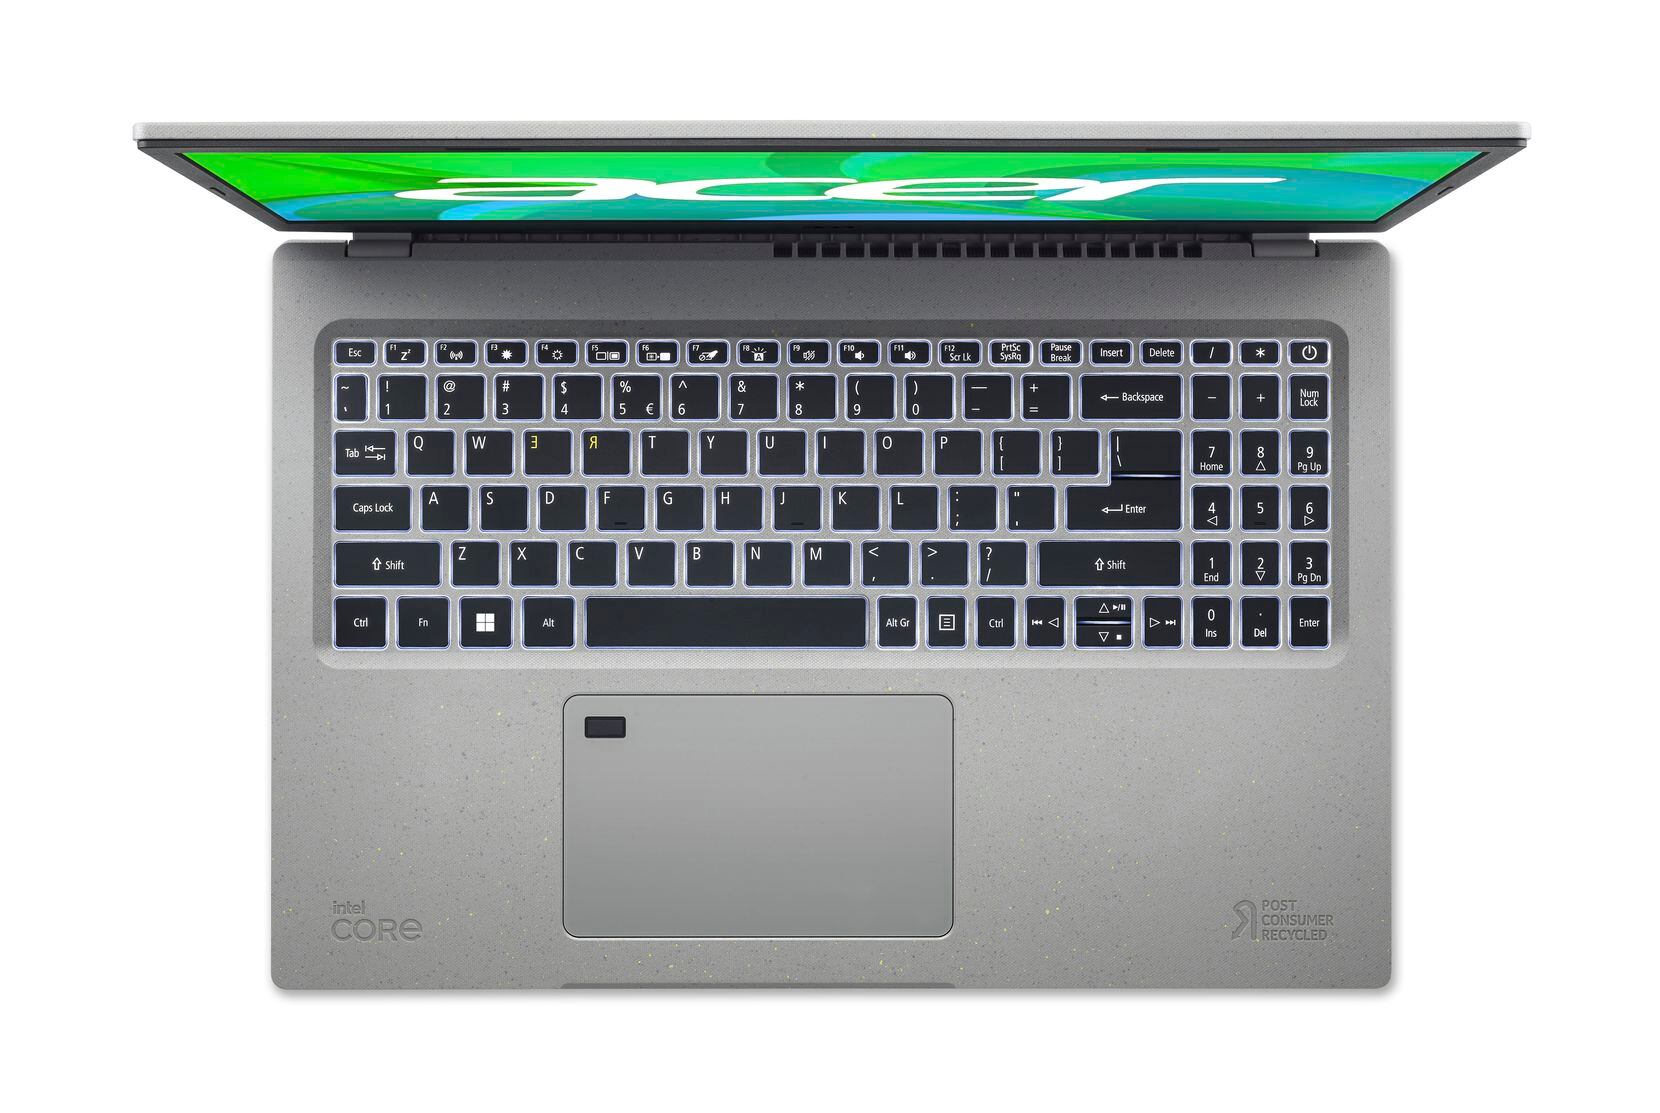 The Acer Aspire Vero has a unique keyboard with an off-center trackpad.